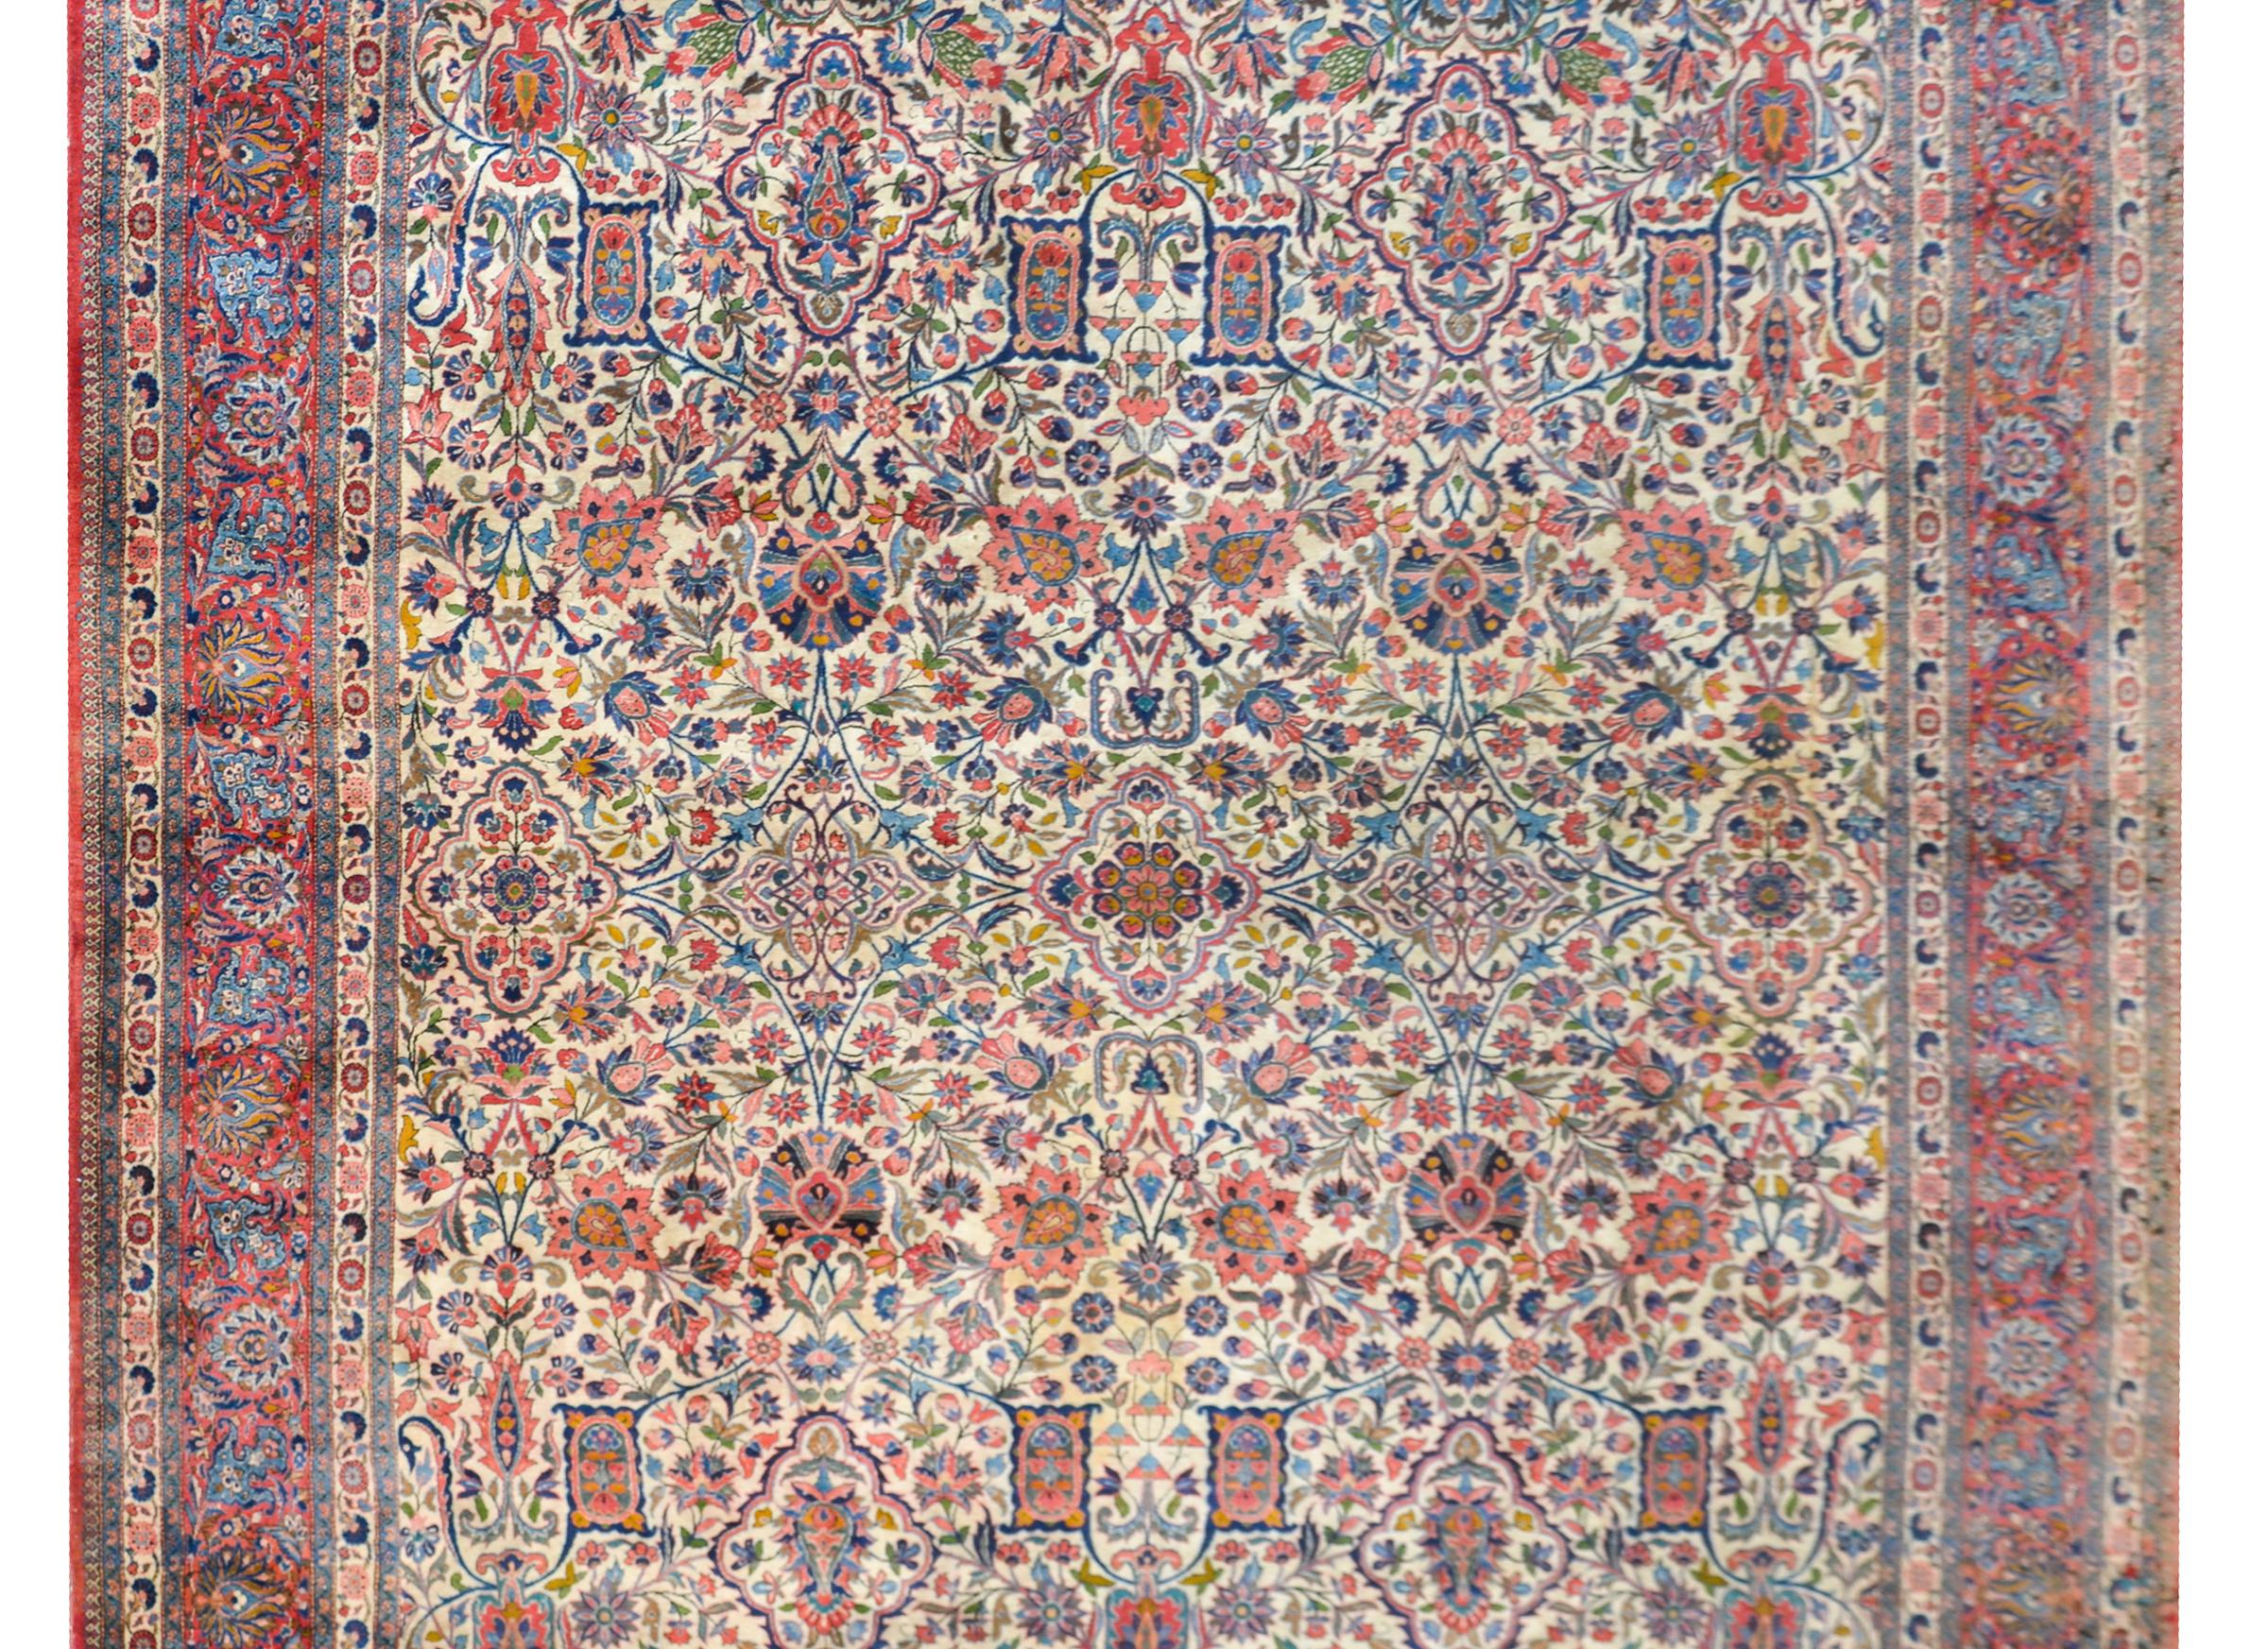 A wonderful early 20th century Persian Kashan rug with an all-over trellis floral and vine pattern woven in myriad colors including crimson, indigos, greens, golds, and pinks, set against a cream colored background, and surrounded by an incredible